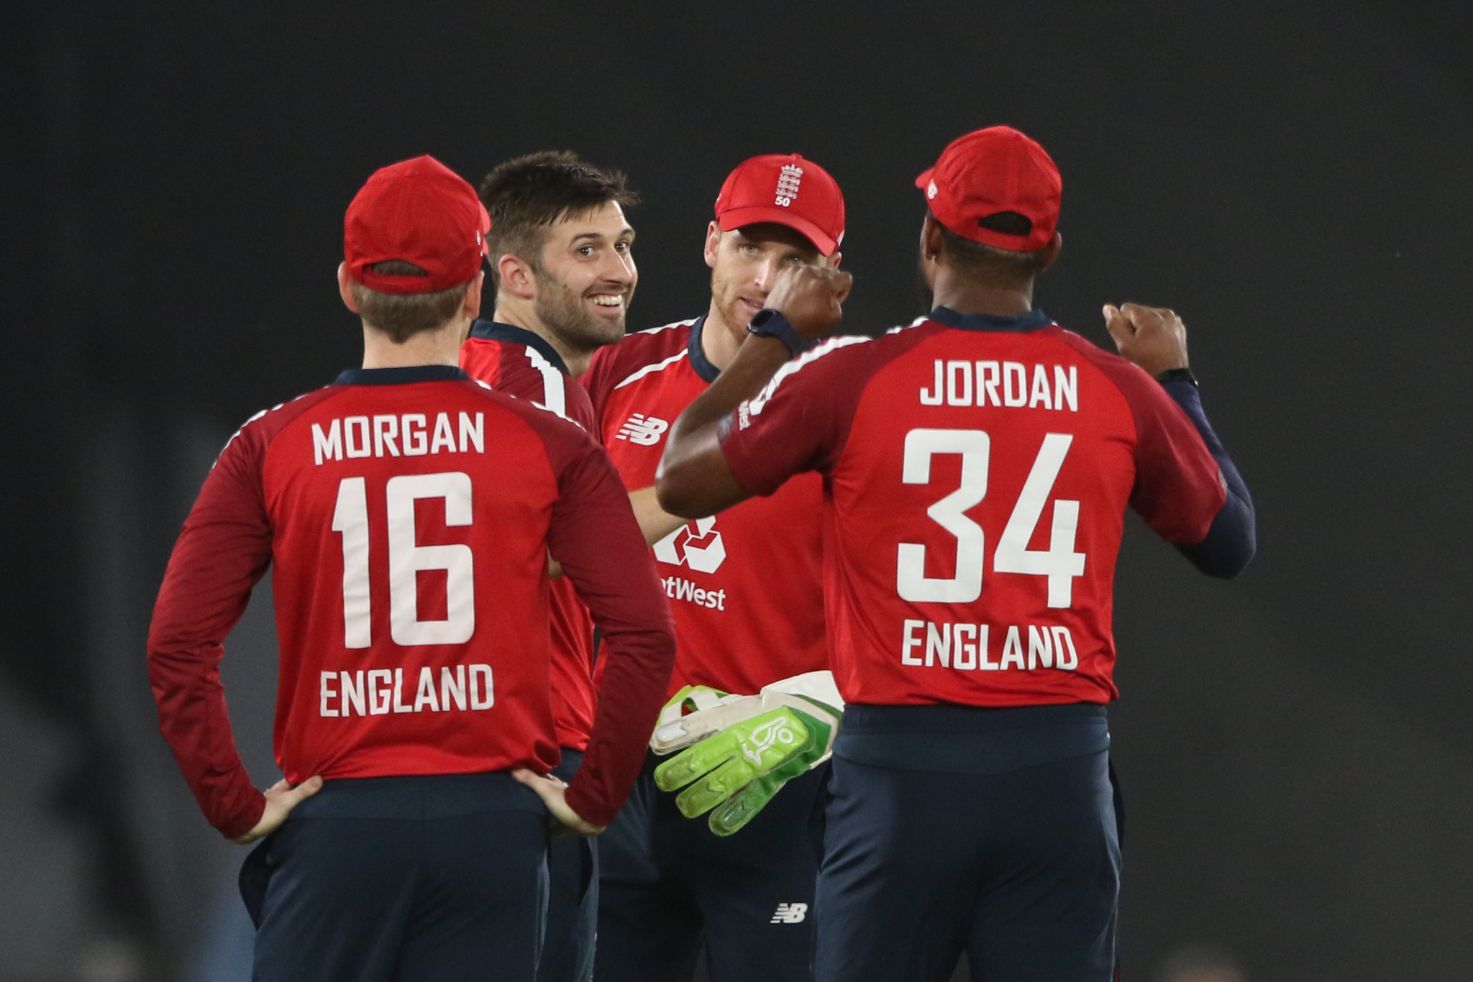 Mark Wood expects 'fire' from returning Tymal Mills, eager to forge Archer-like partnership with him